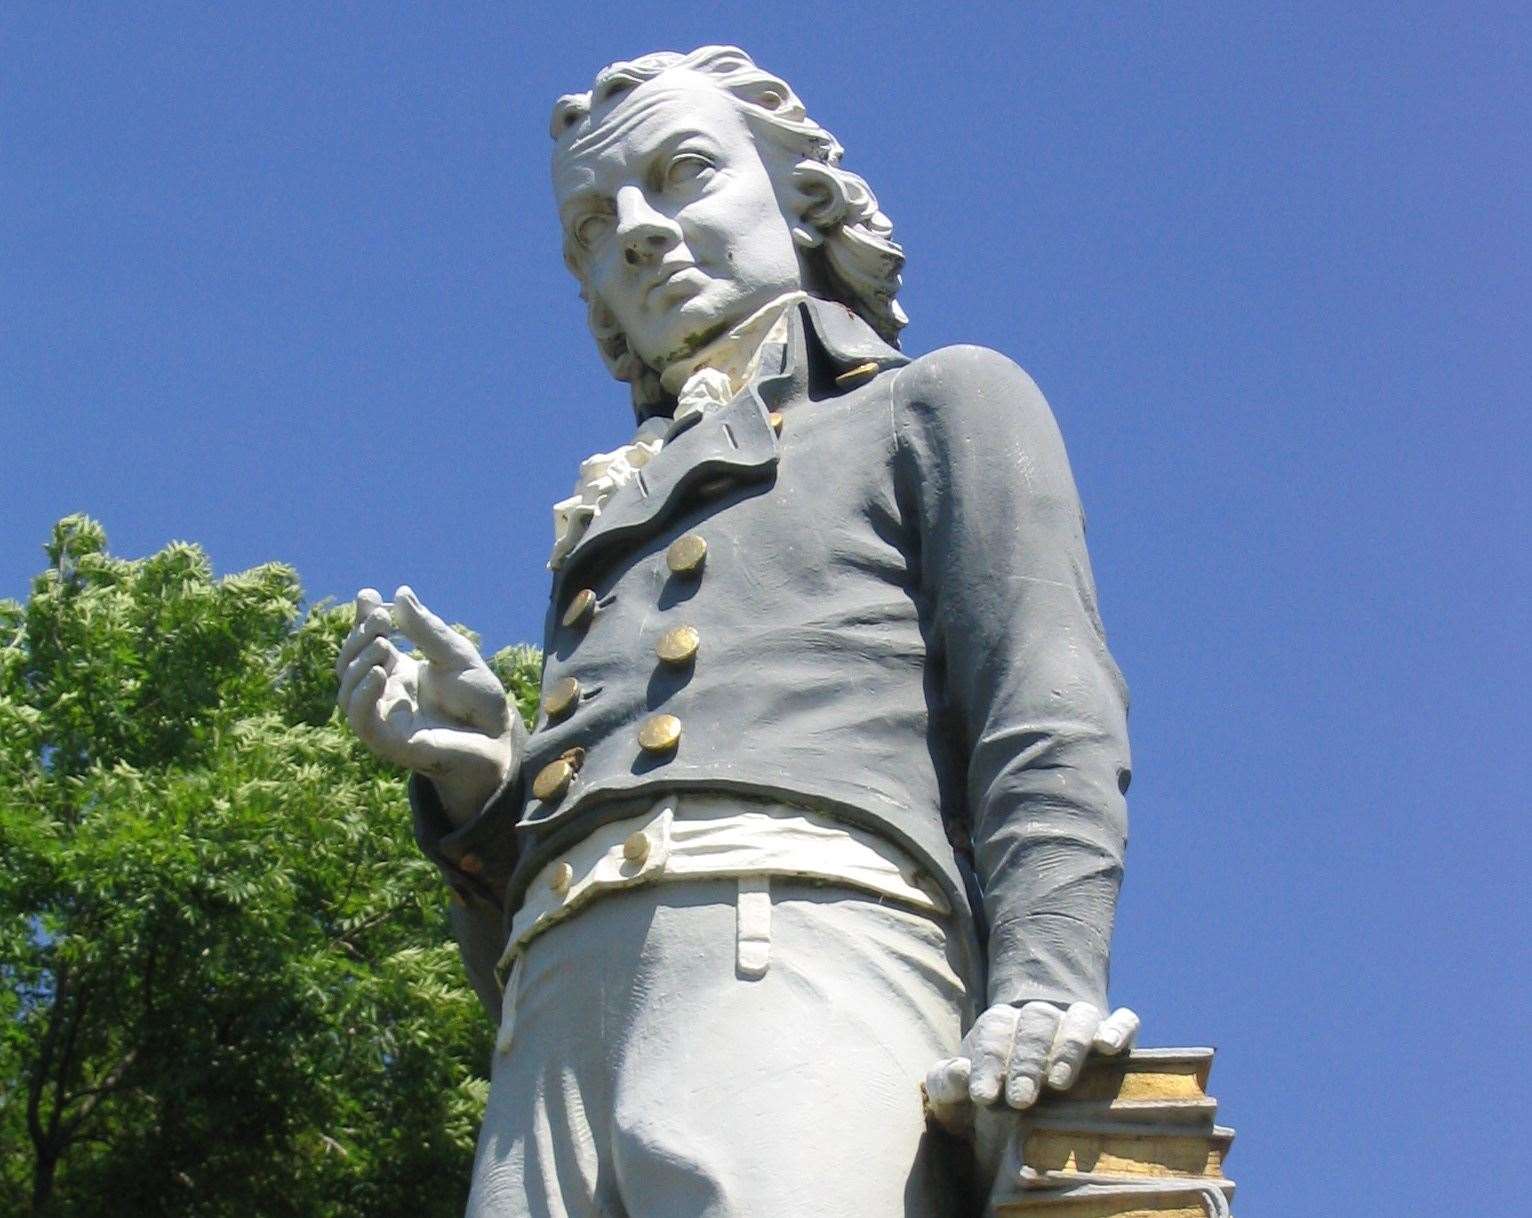 Statue of Edward Jenner, inventor of the smallpox vaccine, in Boulogne, France